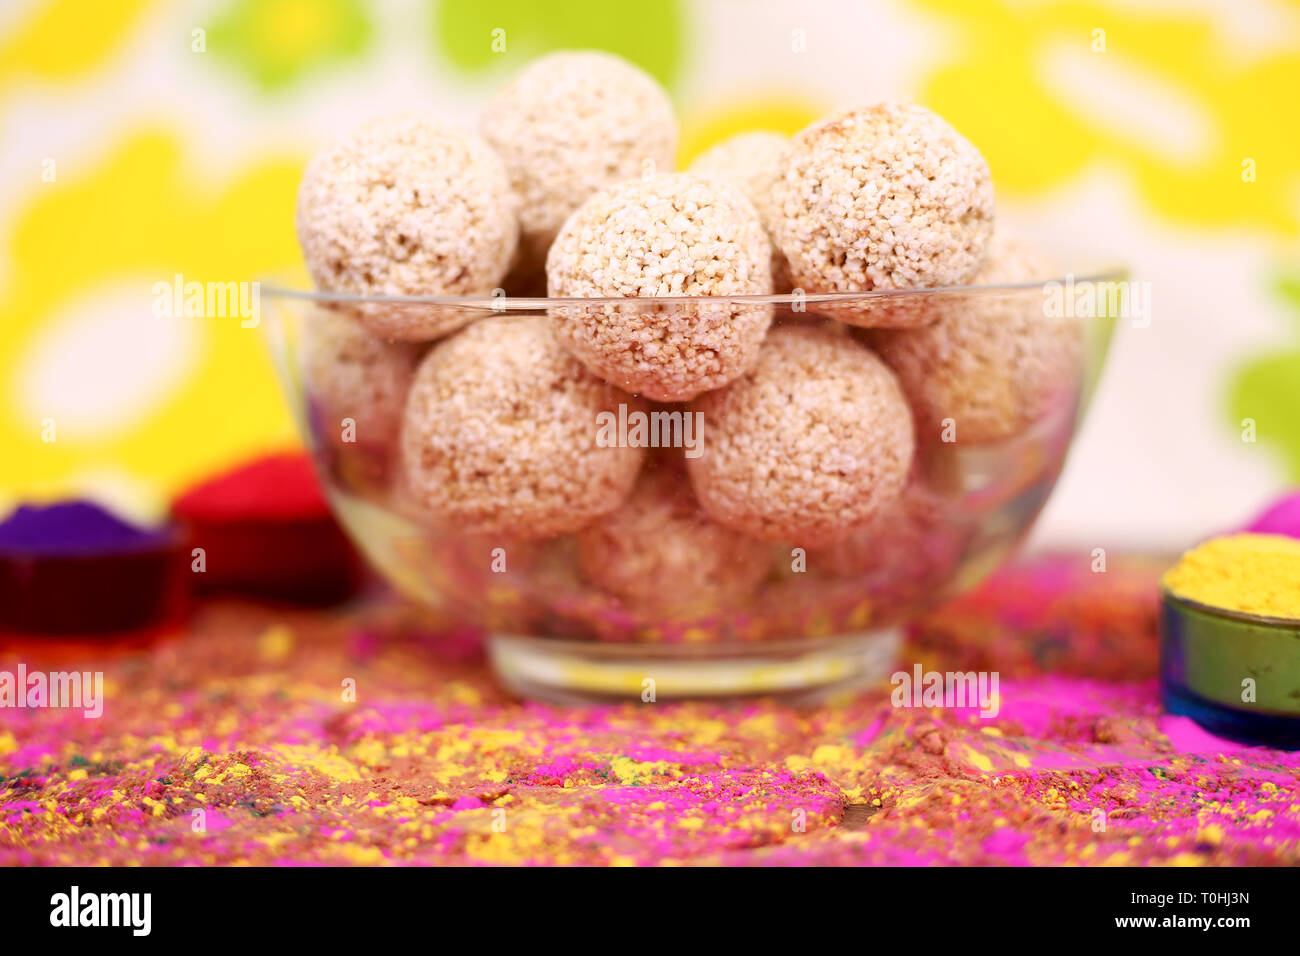 Picture of organic holi color with cholai ke ladoo in the bowl. Isolated on the colorful background. Stock Photo